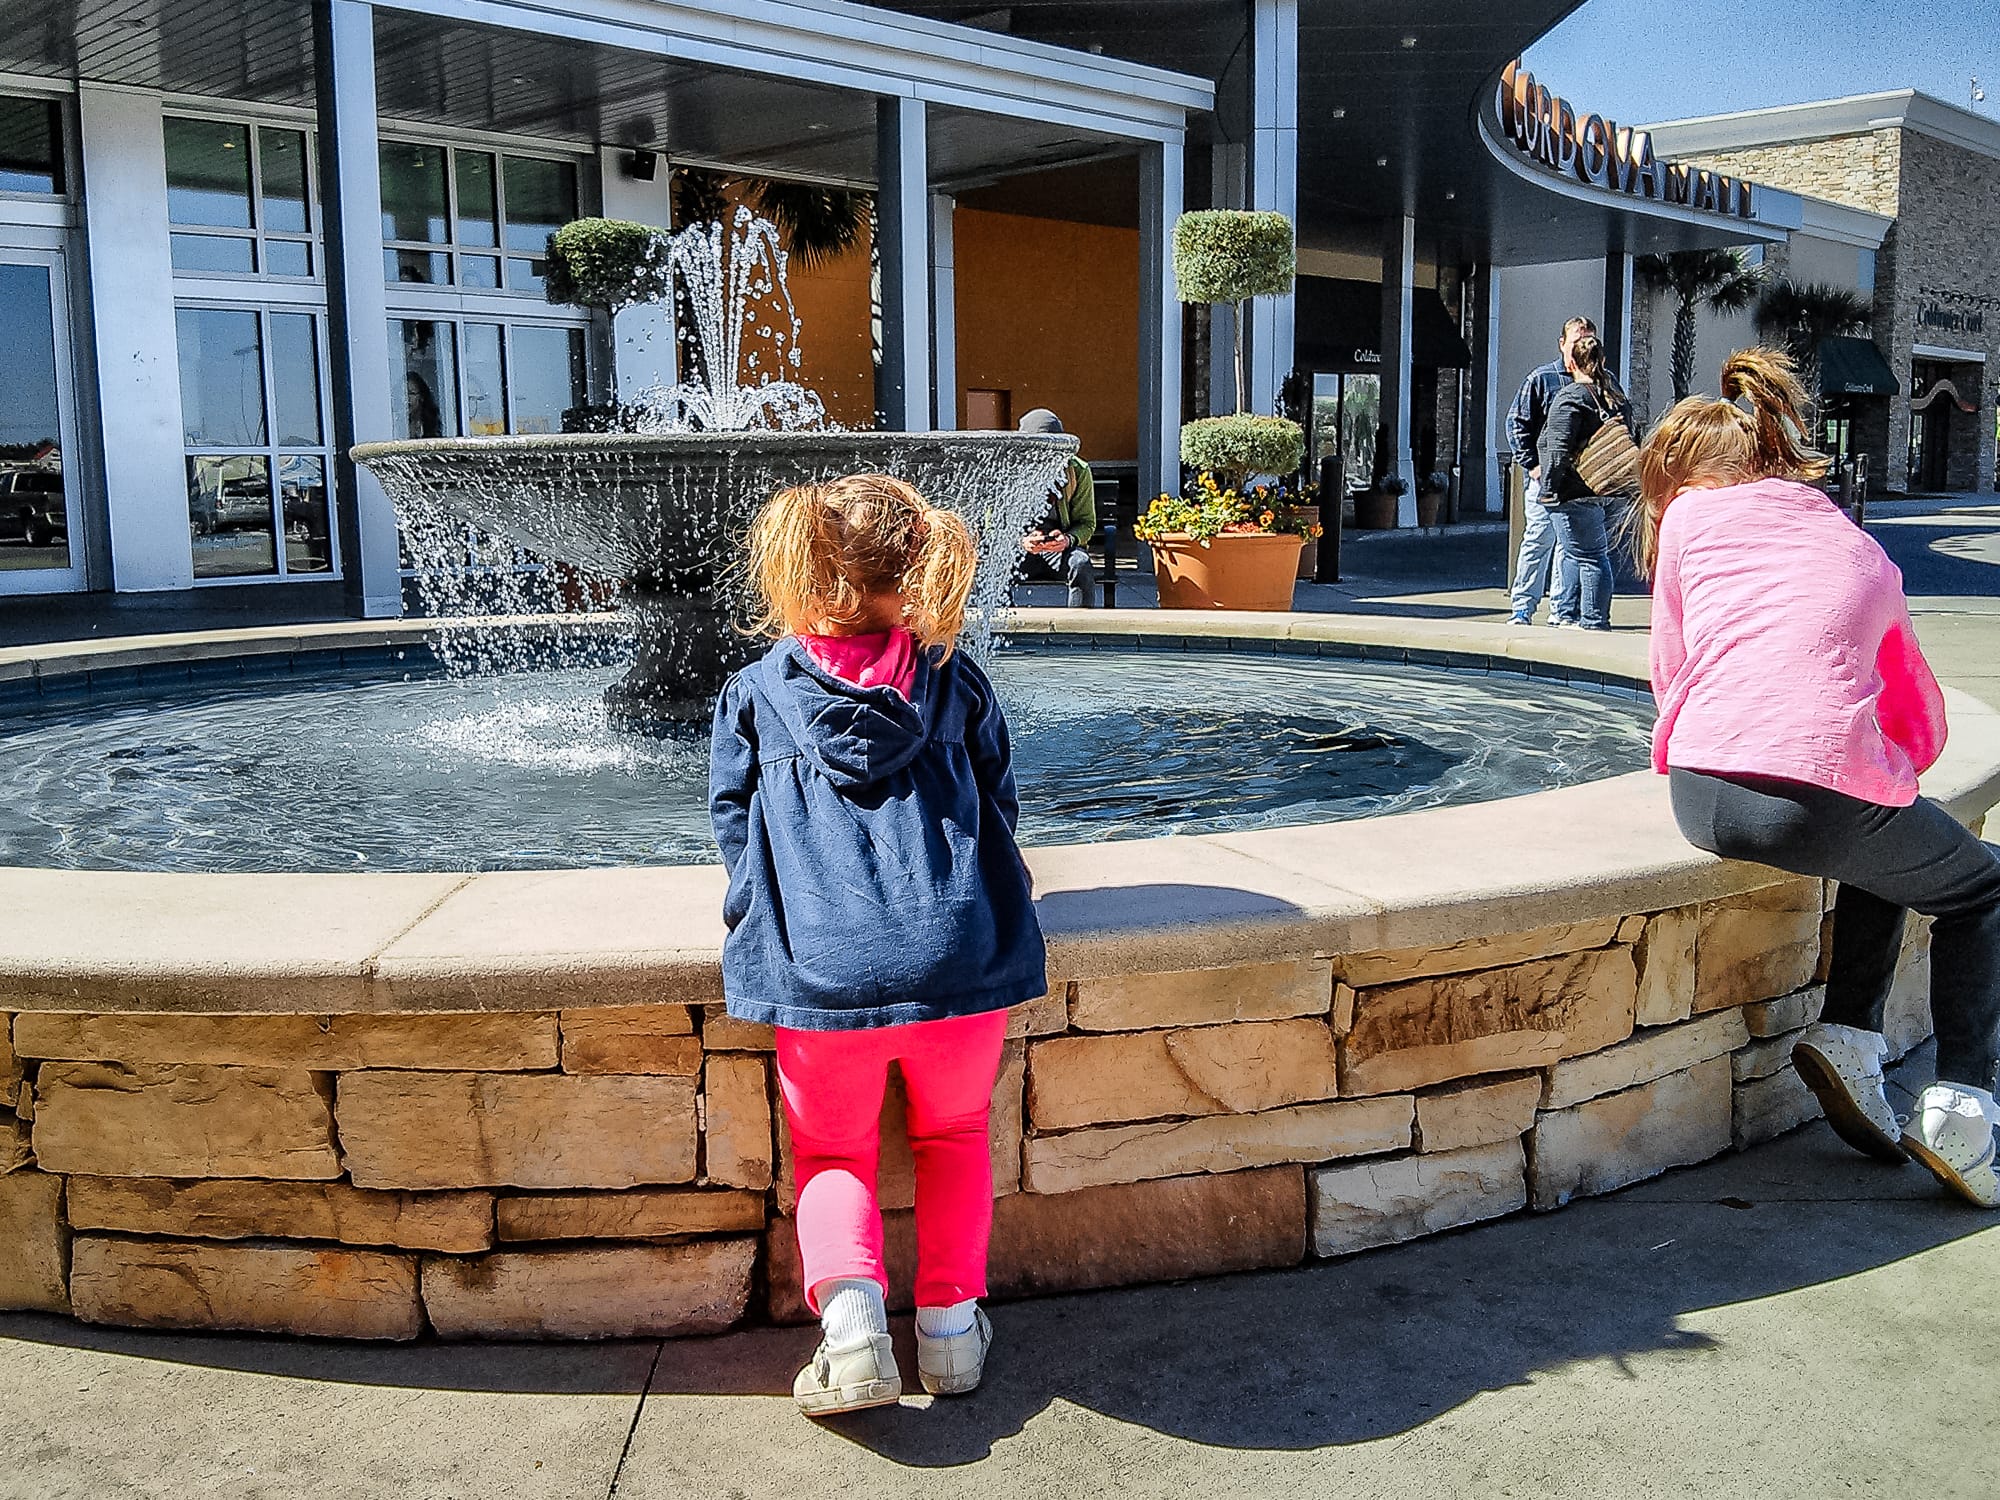 Two young girls seen playing from behind at the fountain at Cordova Mall.